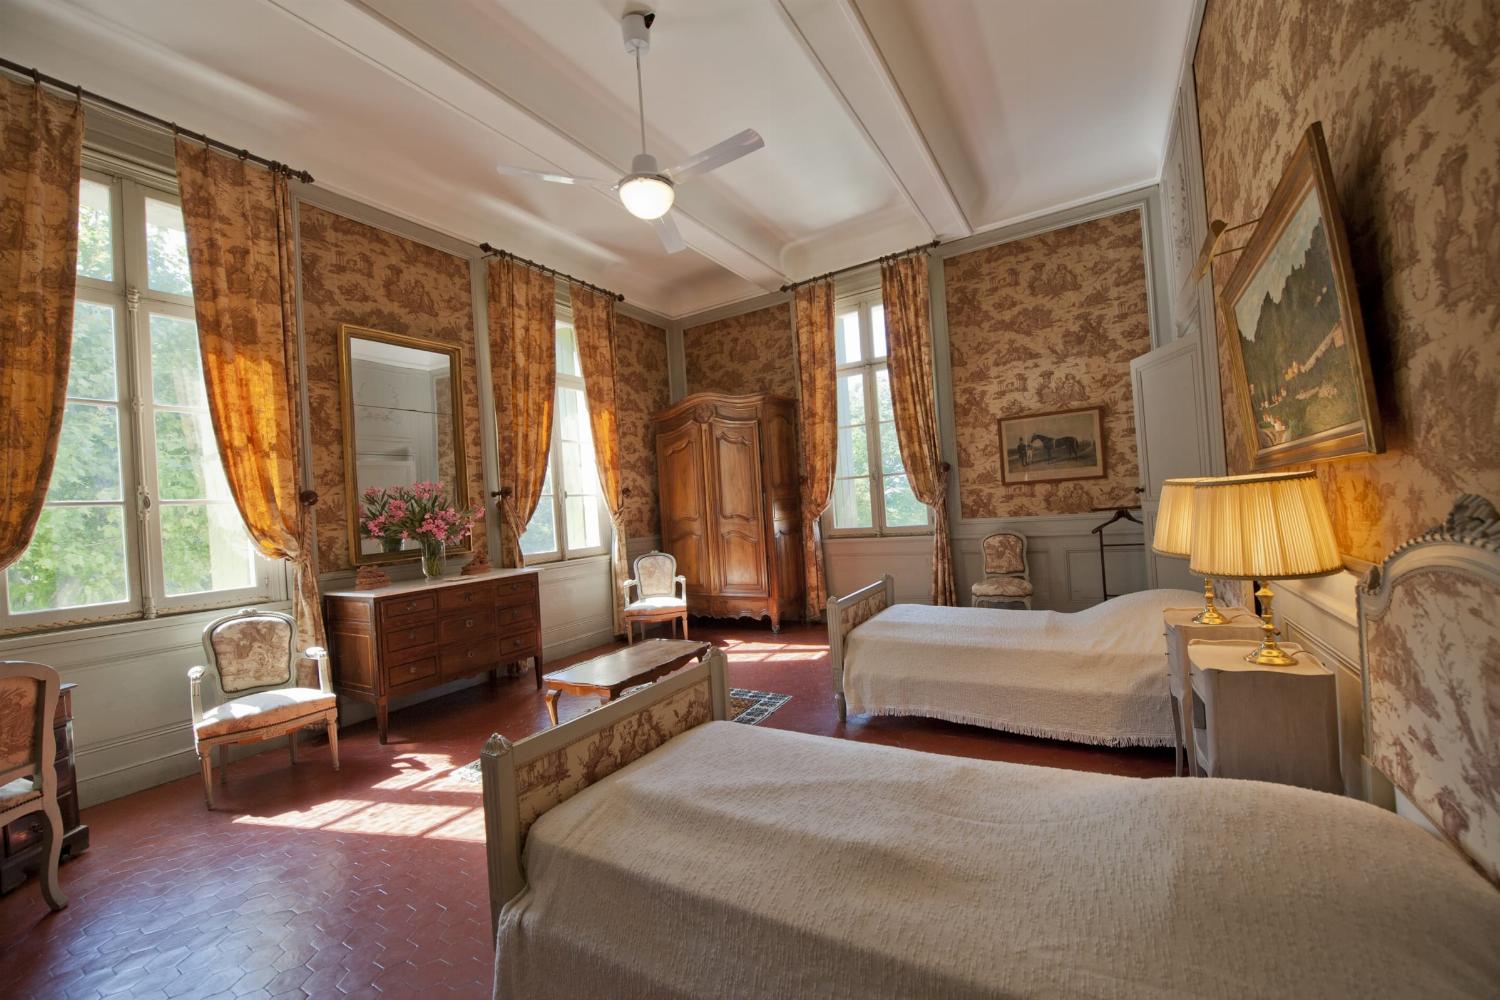 Bedroom | Holiday château in the South of France